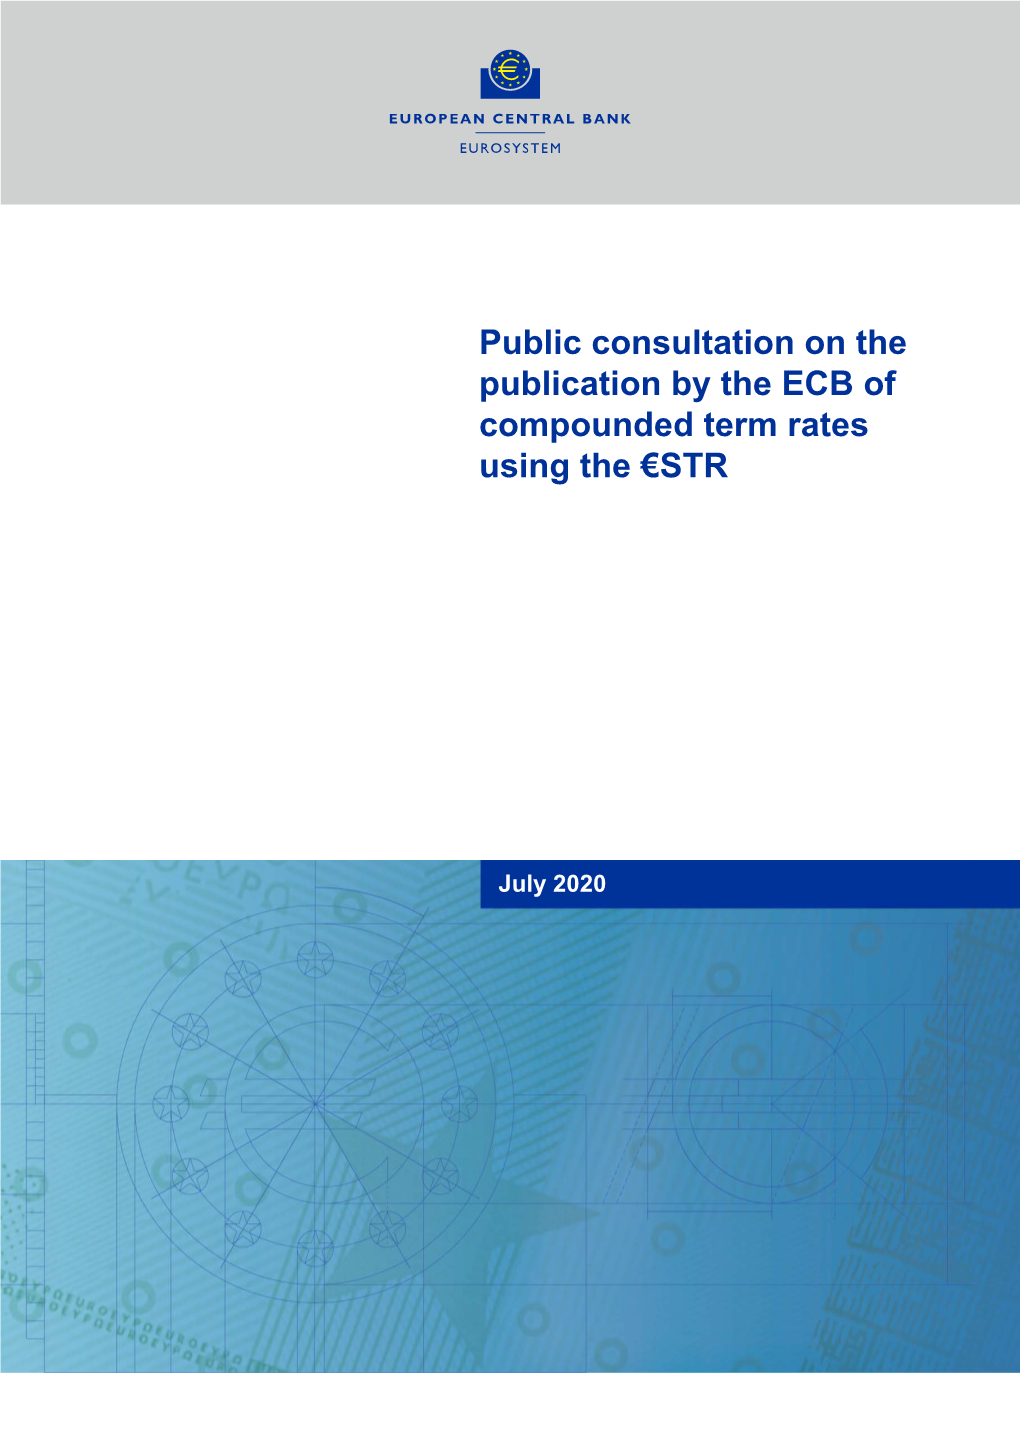 Public Consultation on the Publication by the ECB of Compounded Term Rates Using the €STR